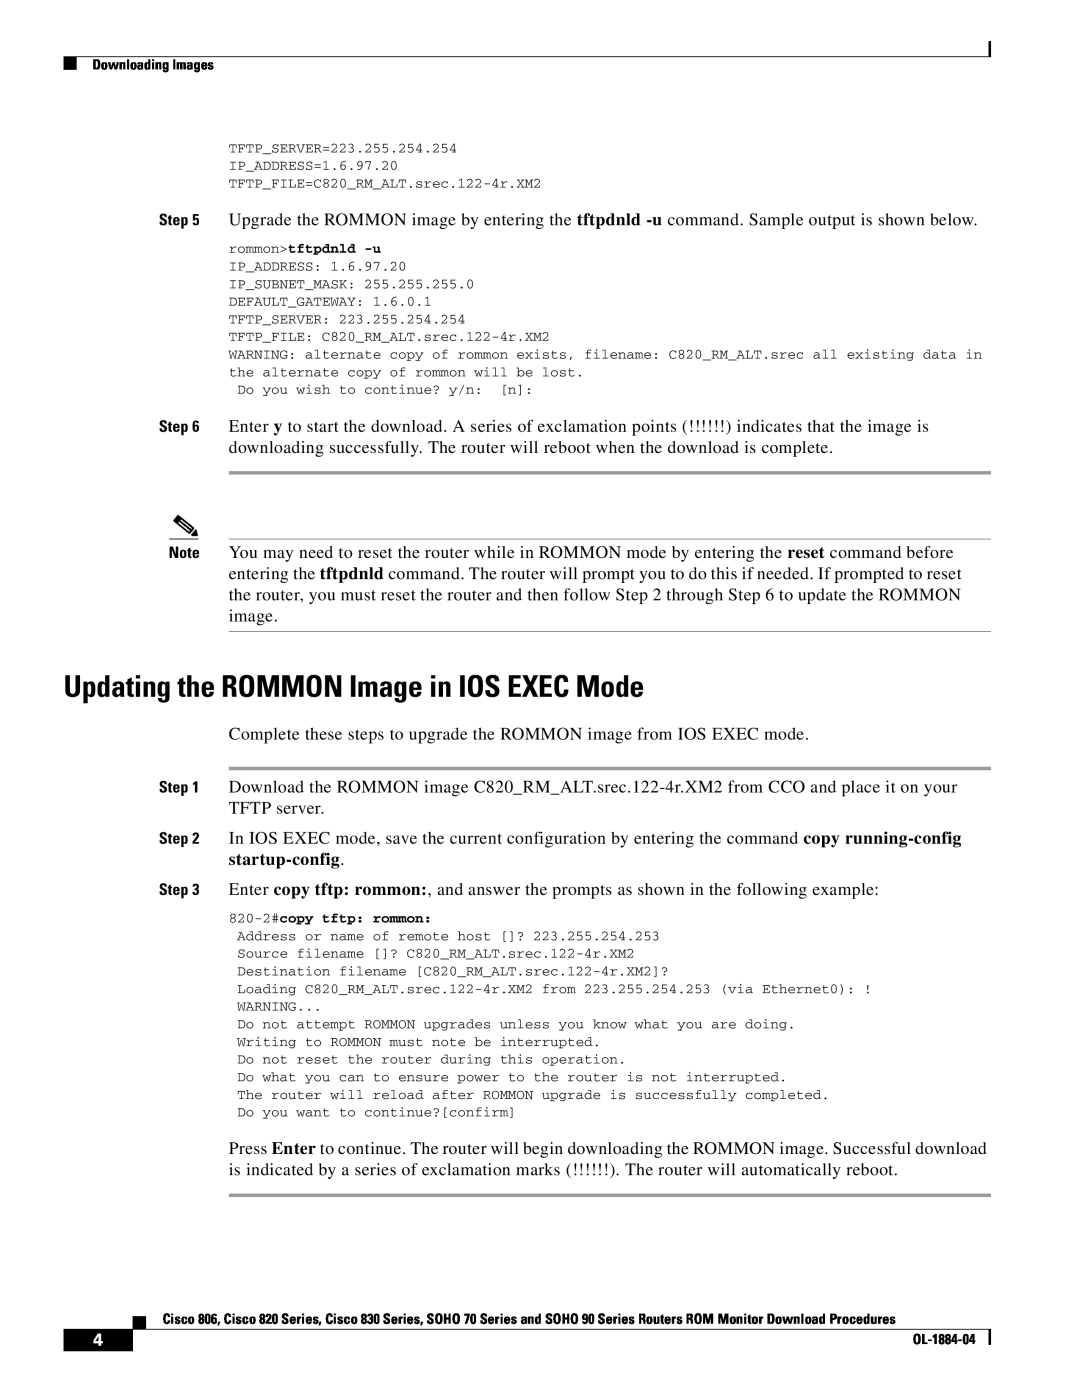 Cisco Systems 830 Series, 806 Series, SOHO 70 Series manual Updating the ROMMON Image in IOS EXEC Mode, startup-config 